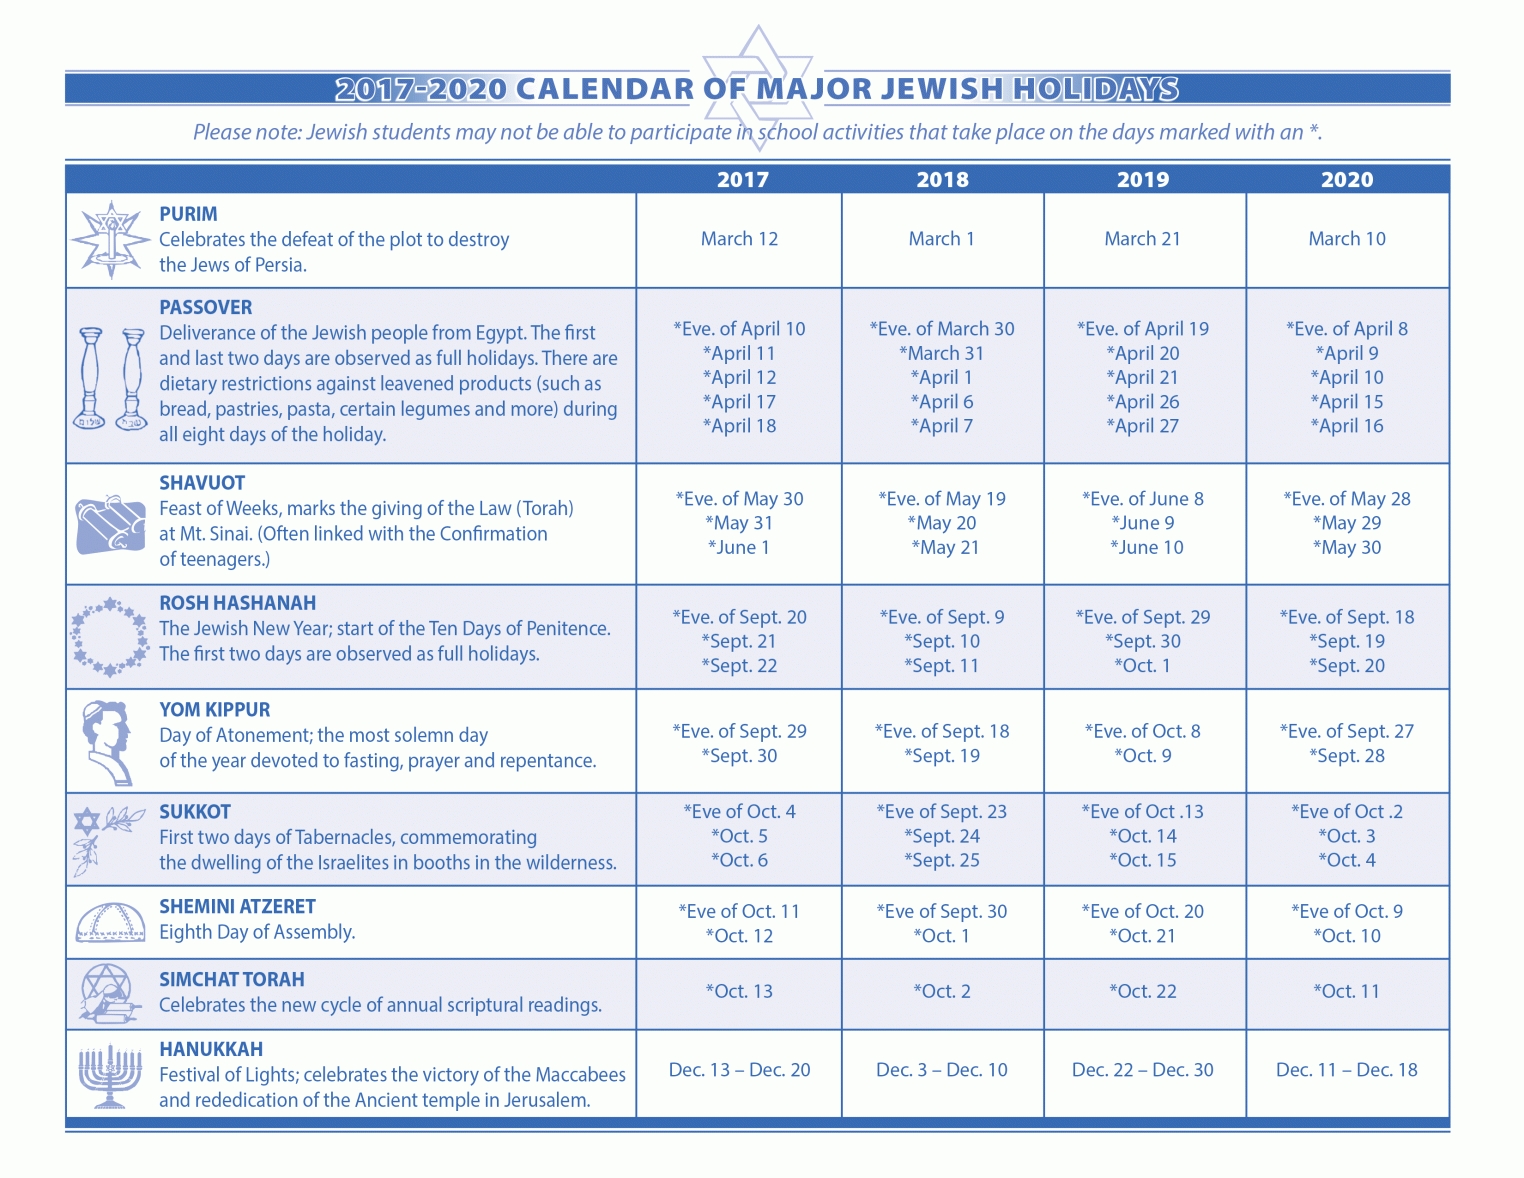 The Jewish Calendar – Holidays 2018 2019 2020 | Kosher Seek-What Are The Dates Of The Jewish Holidays For 2020